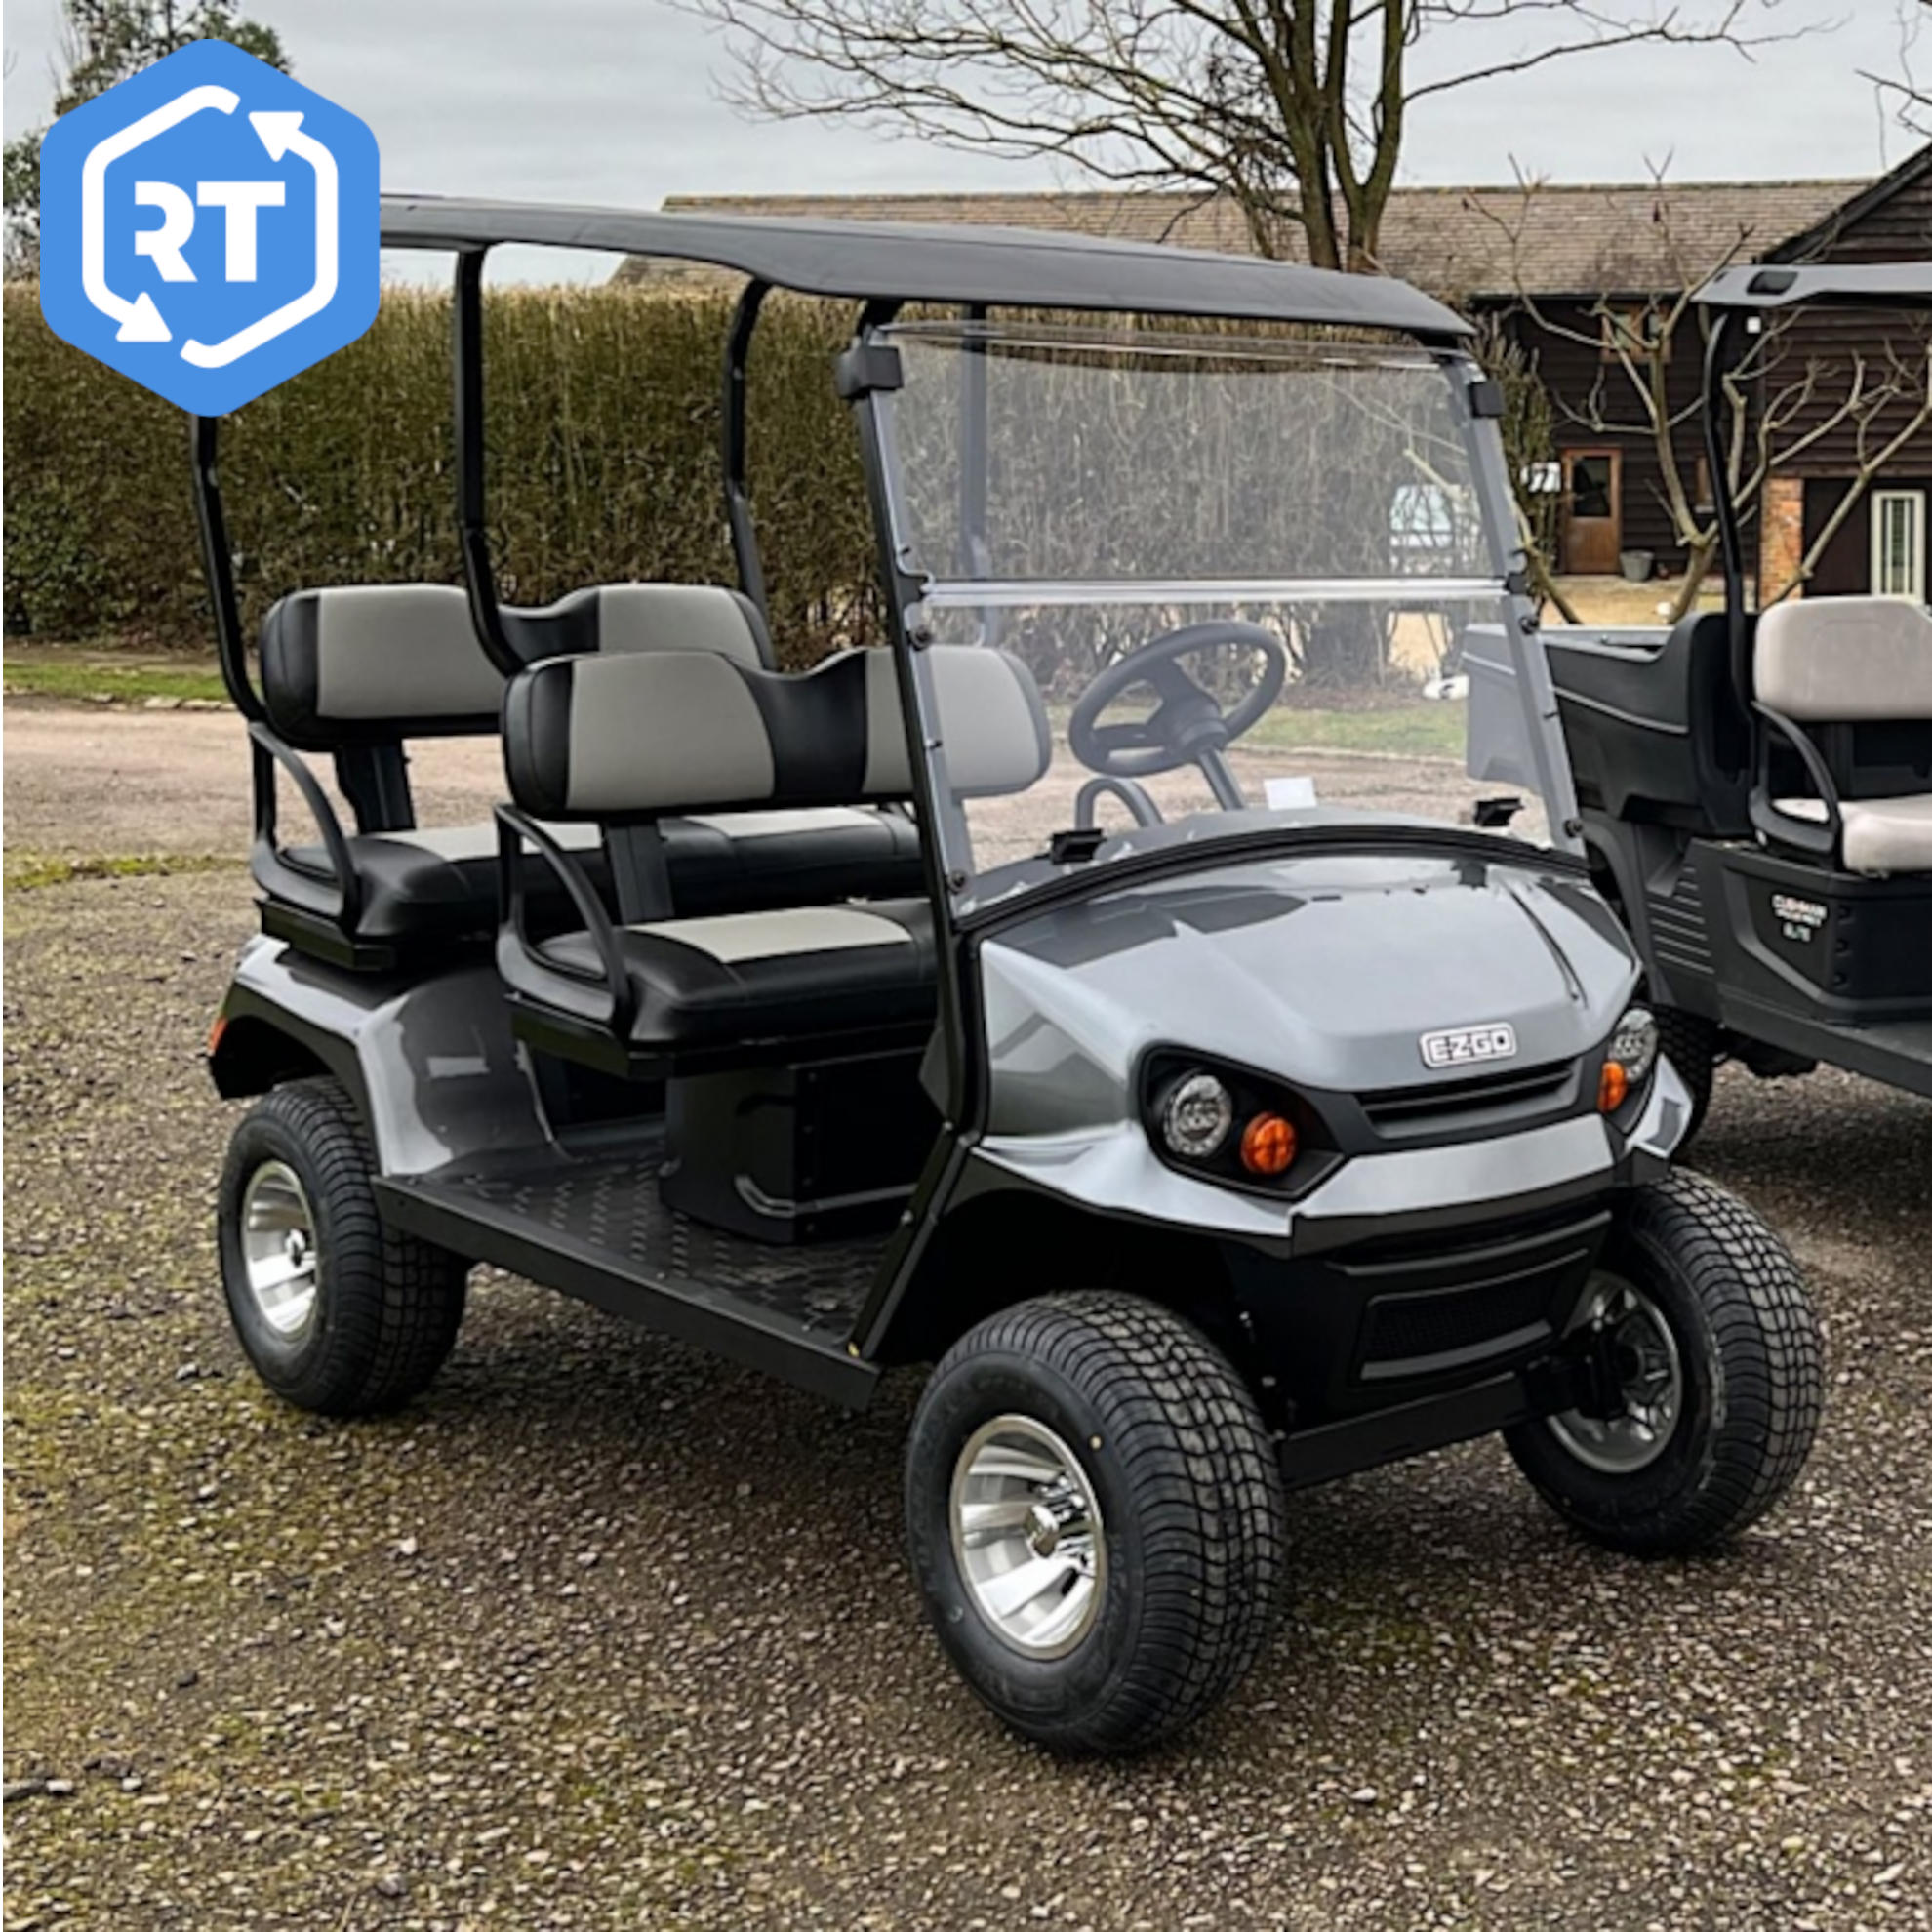 Used E-Z-GO Liberty Links Battery-powered Golf Cart + Personnel Carrier